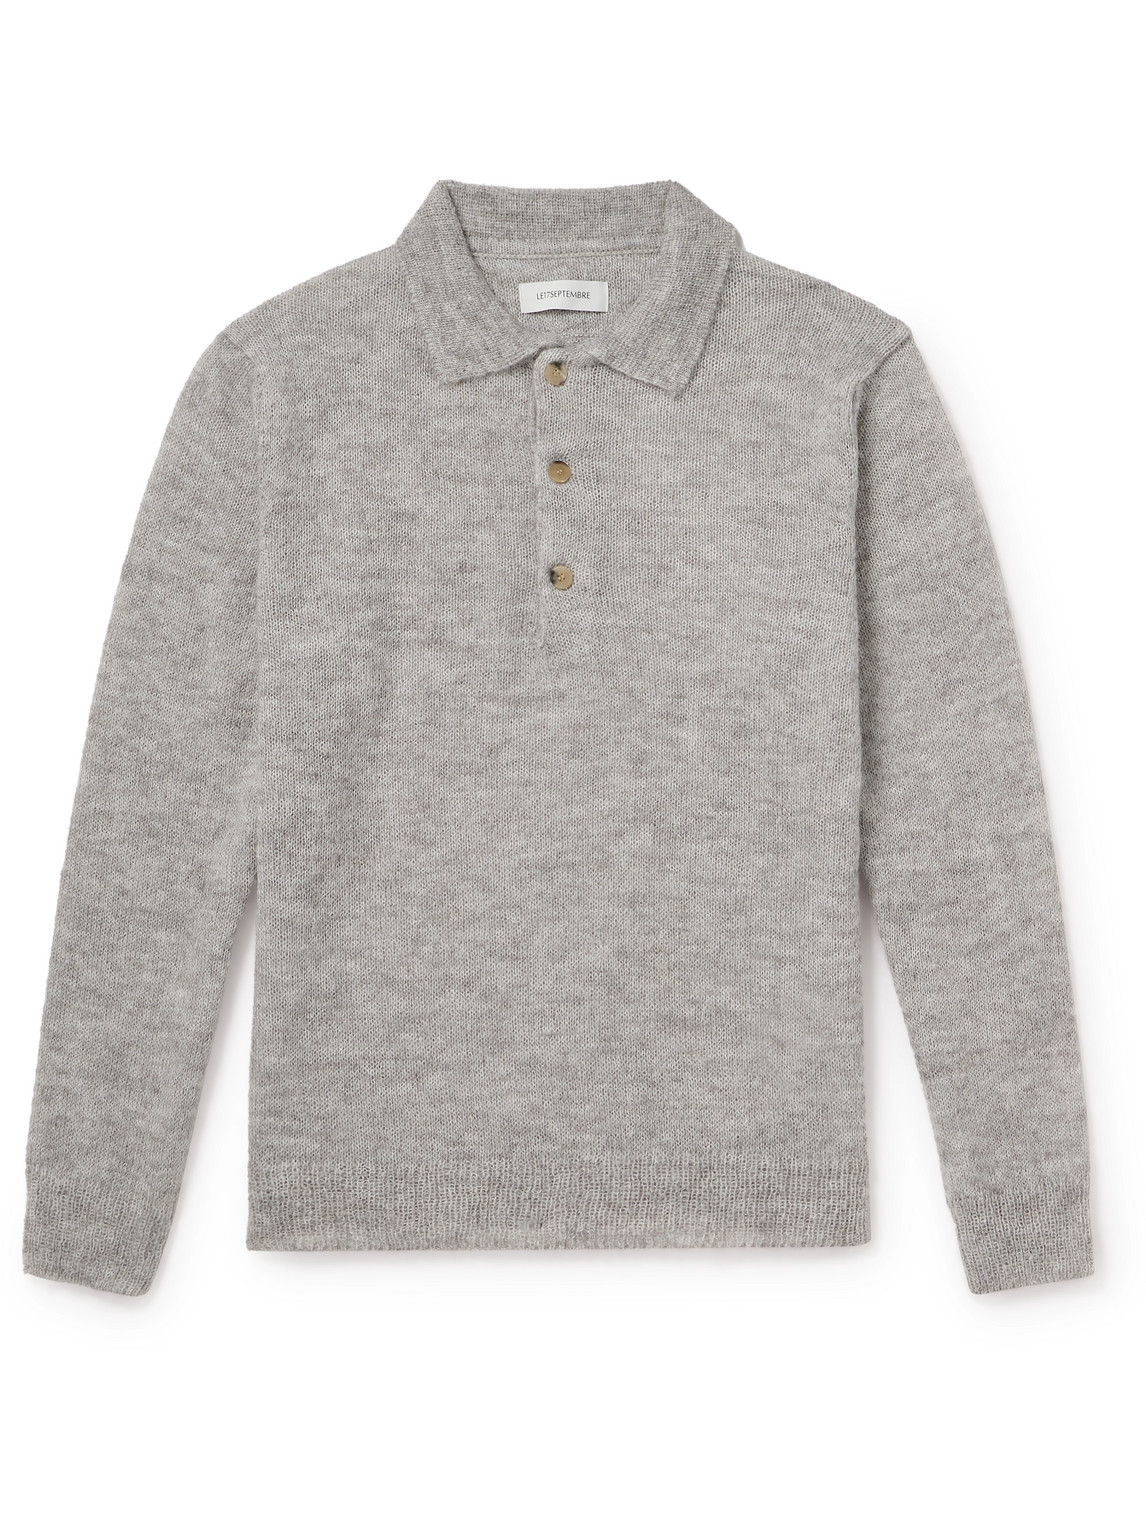 Le 17 Septembre Knitted Polo Shirt In Gray